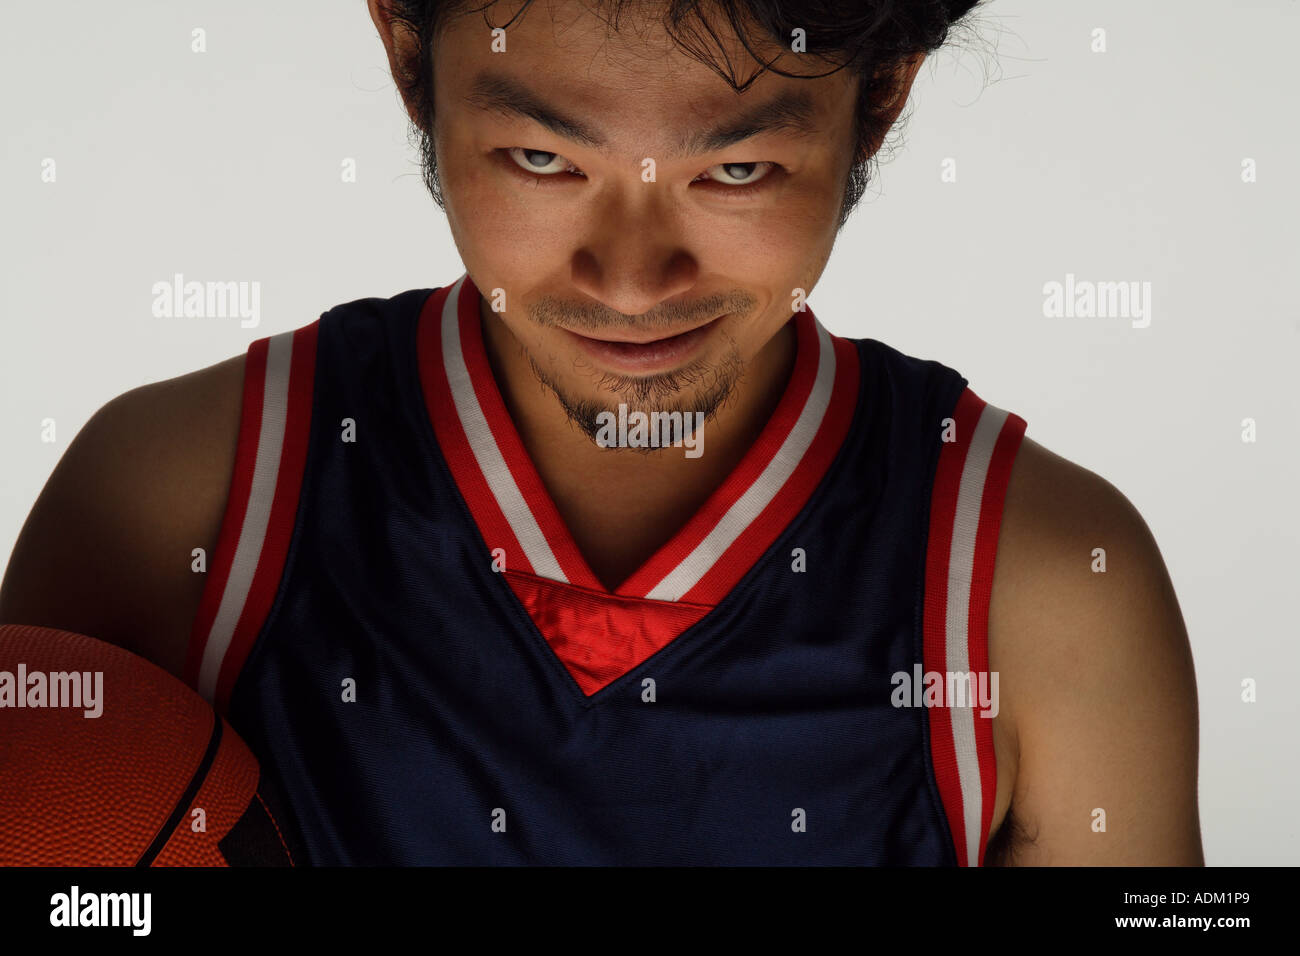 Asian Basketball Player Making a Scary Face Stock Photo